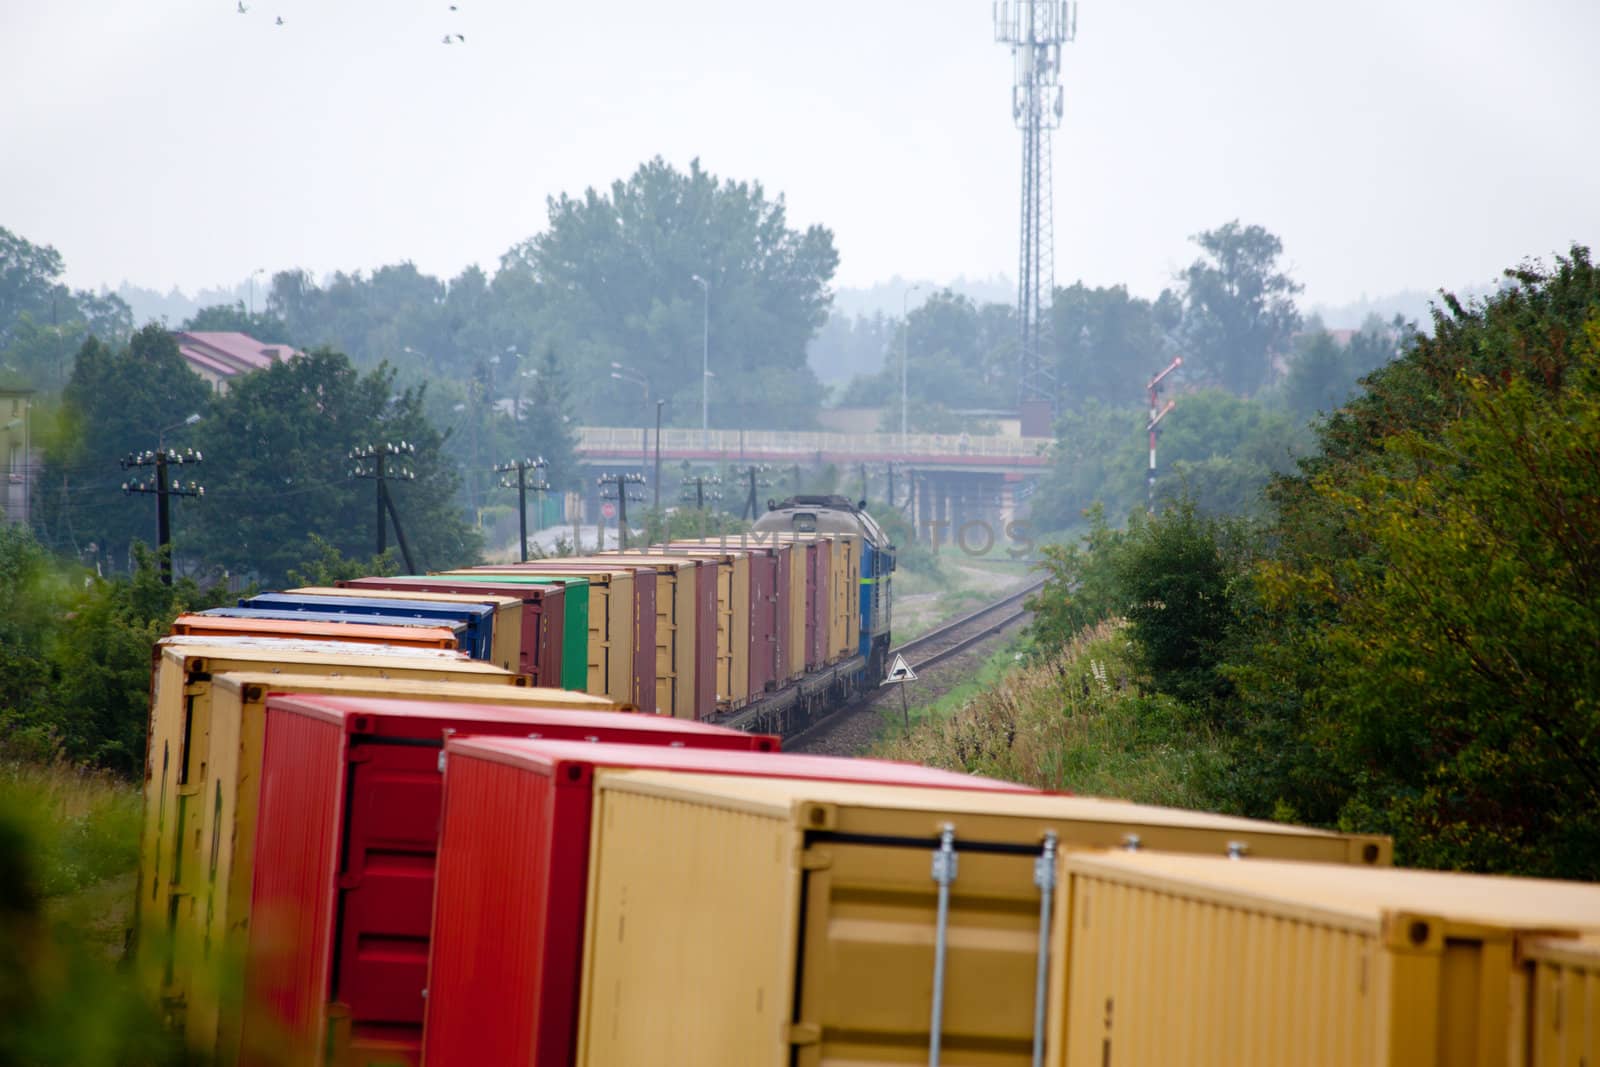 Rural landscape with the container train passing through countryside
